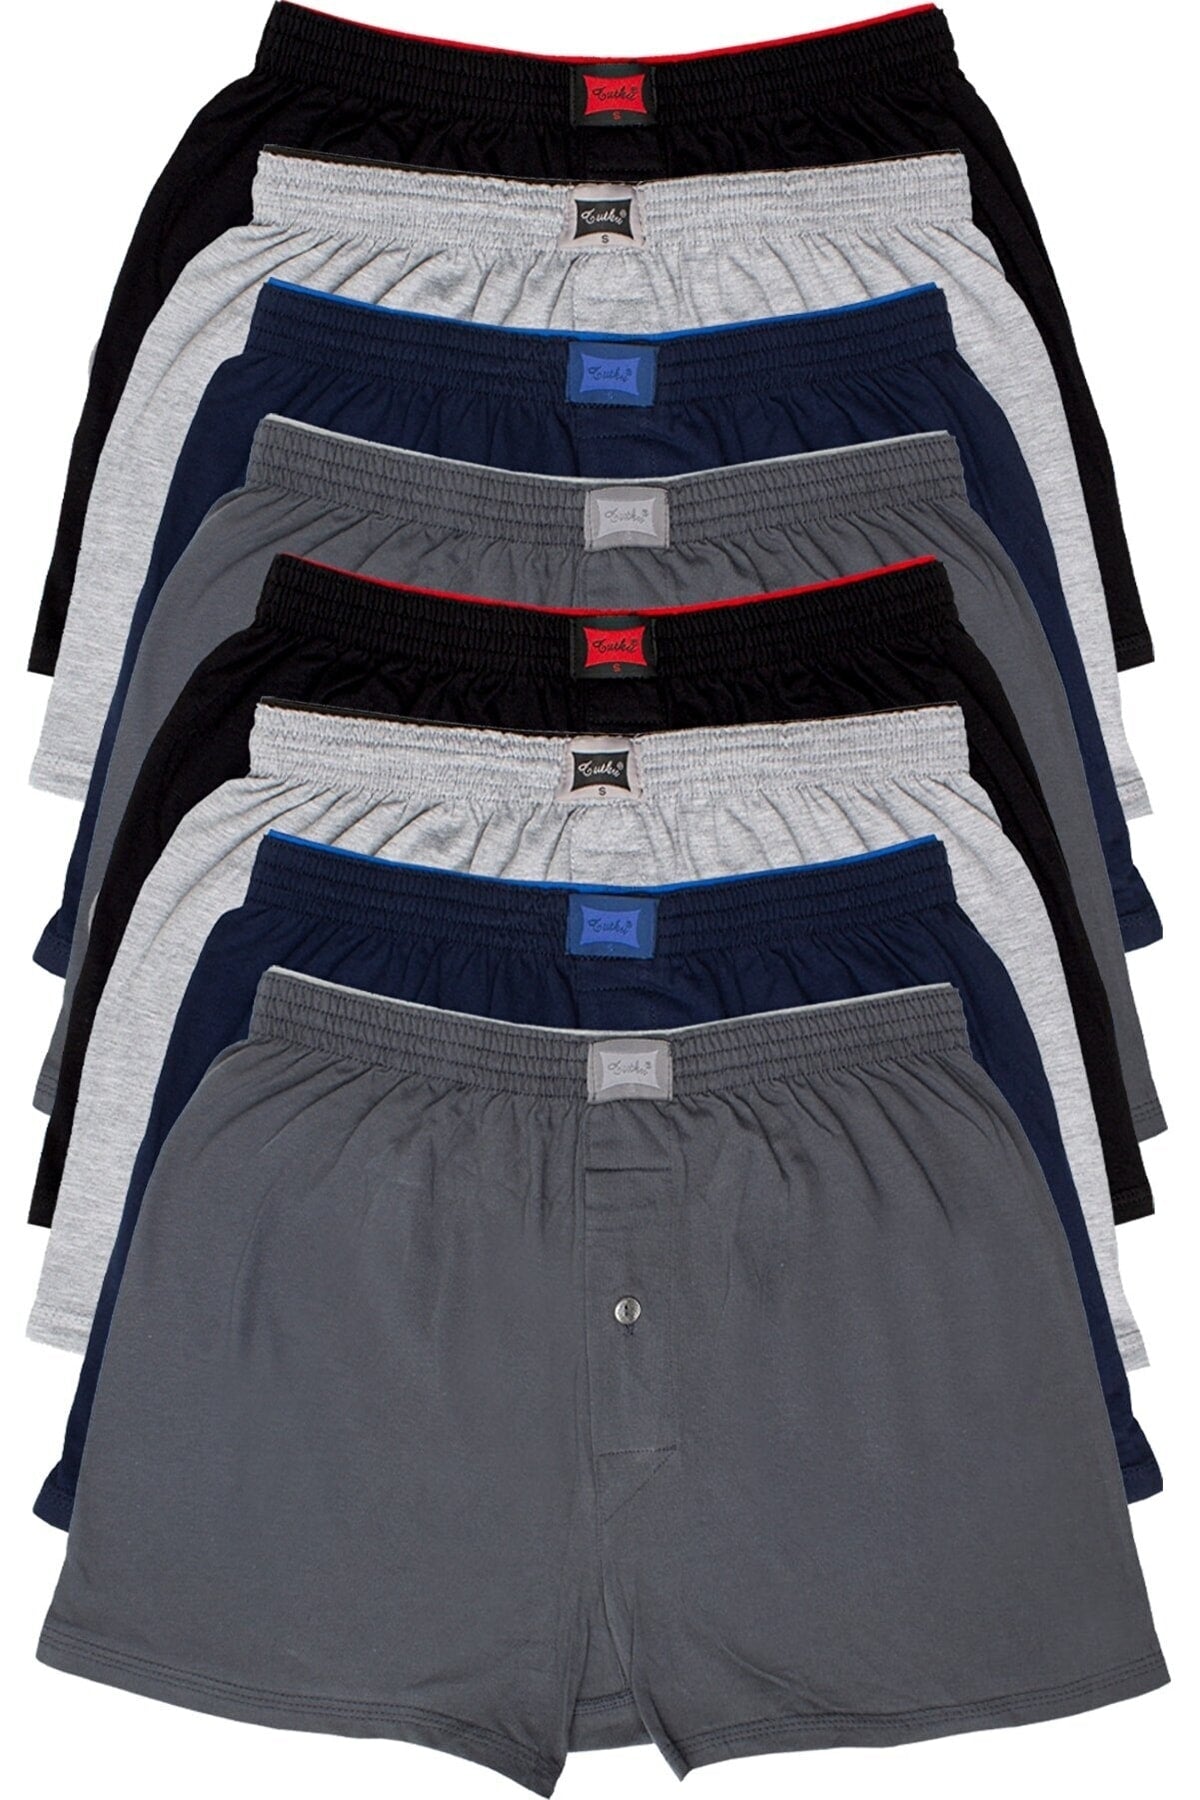 8 Opportunity Items! Men's Combed Cotton Towel Waist Boxer